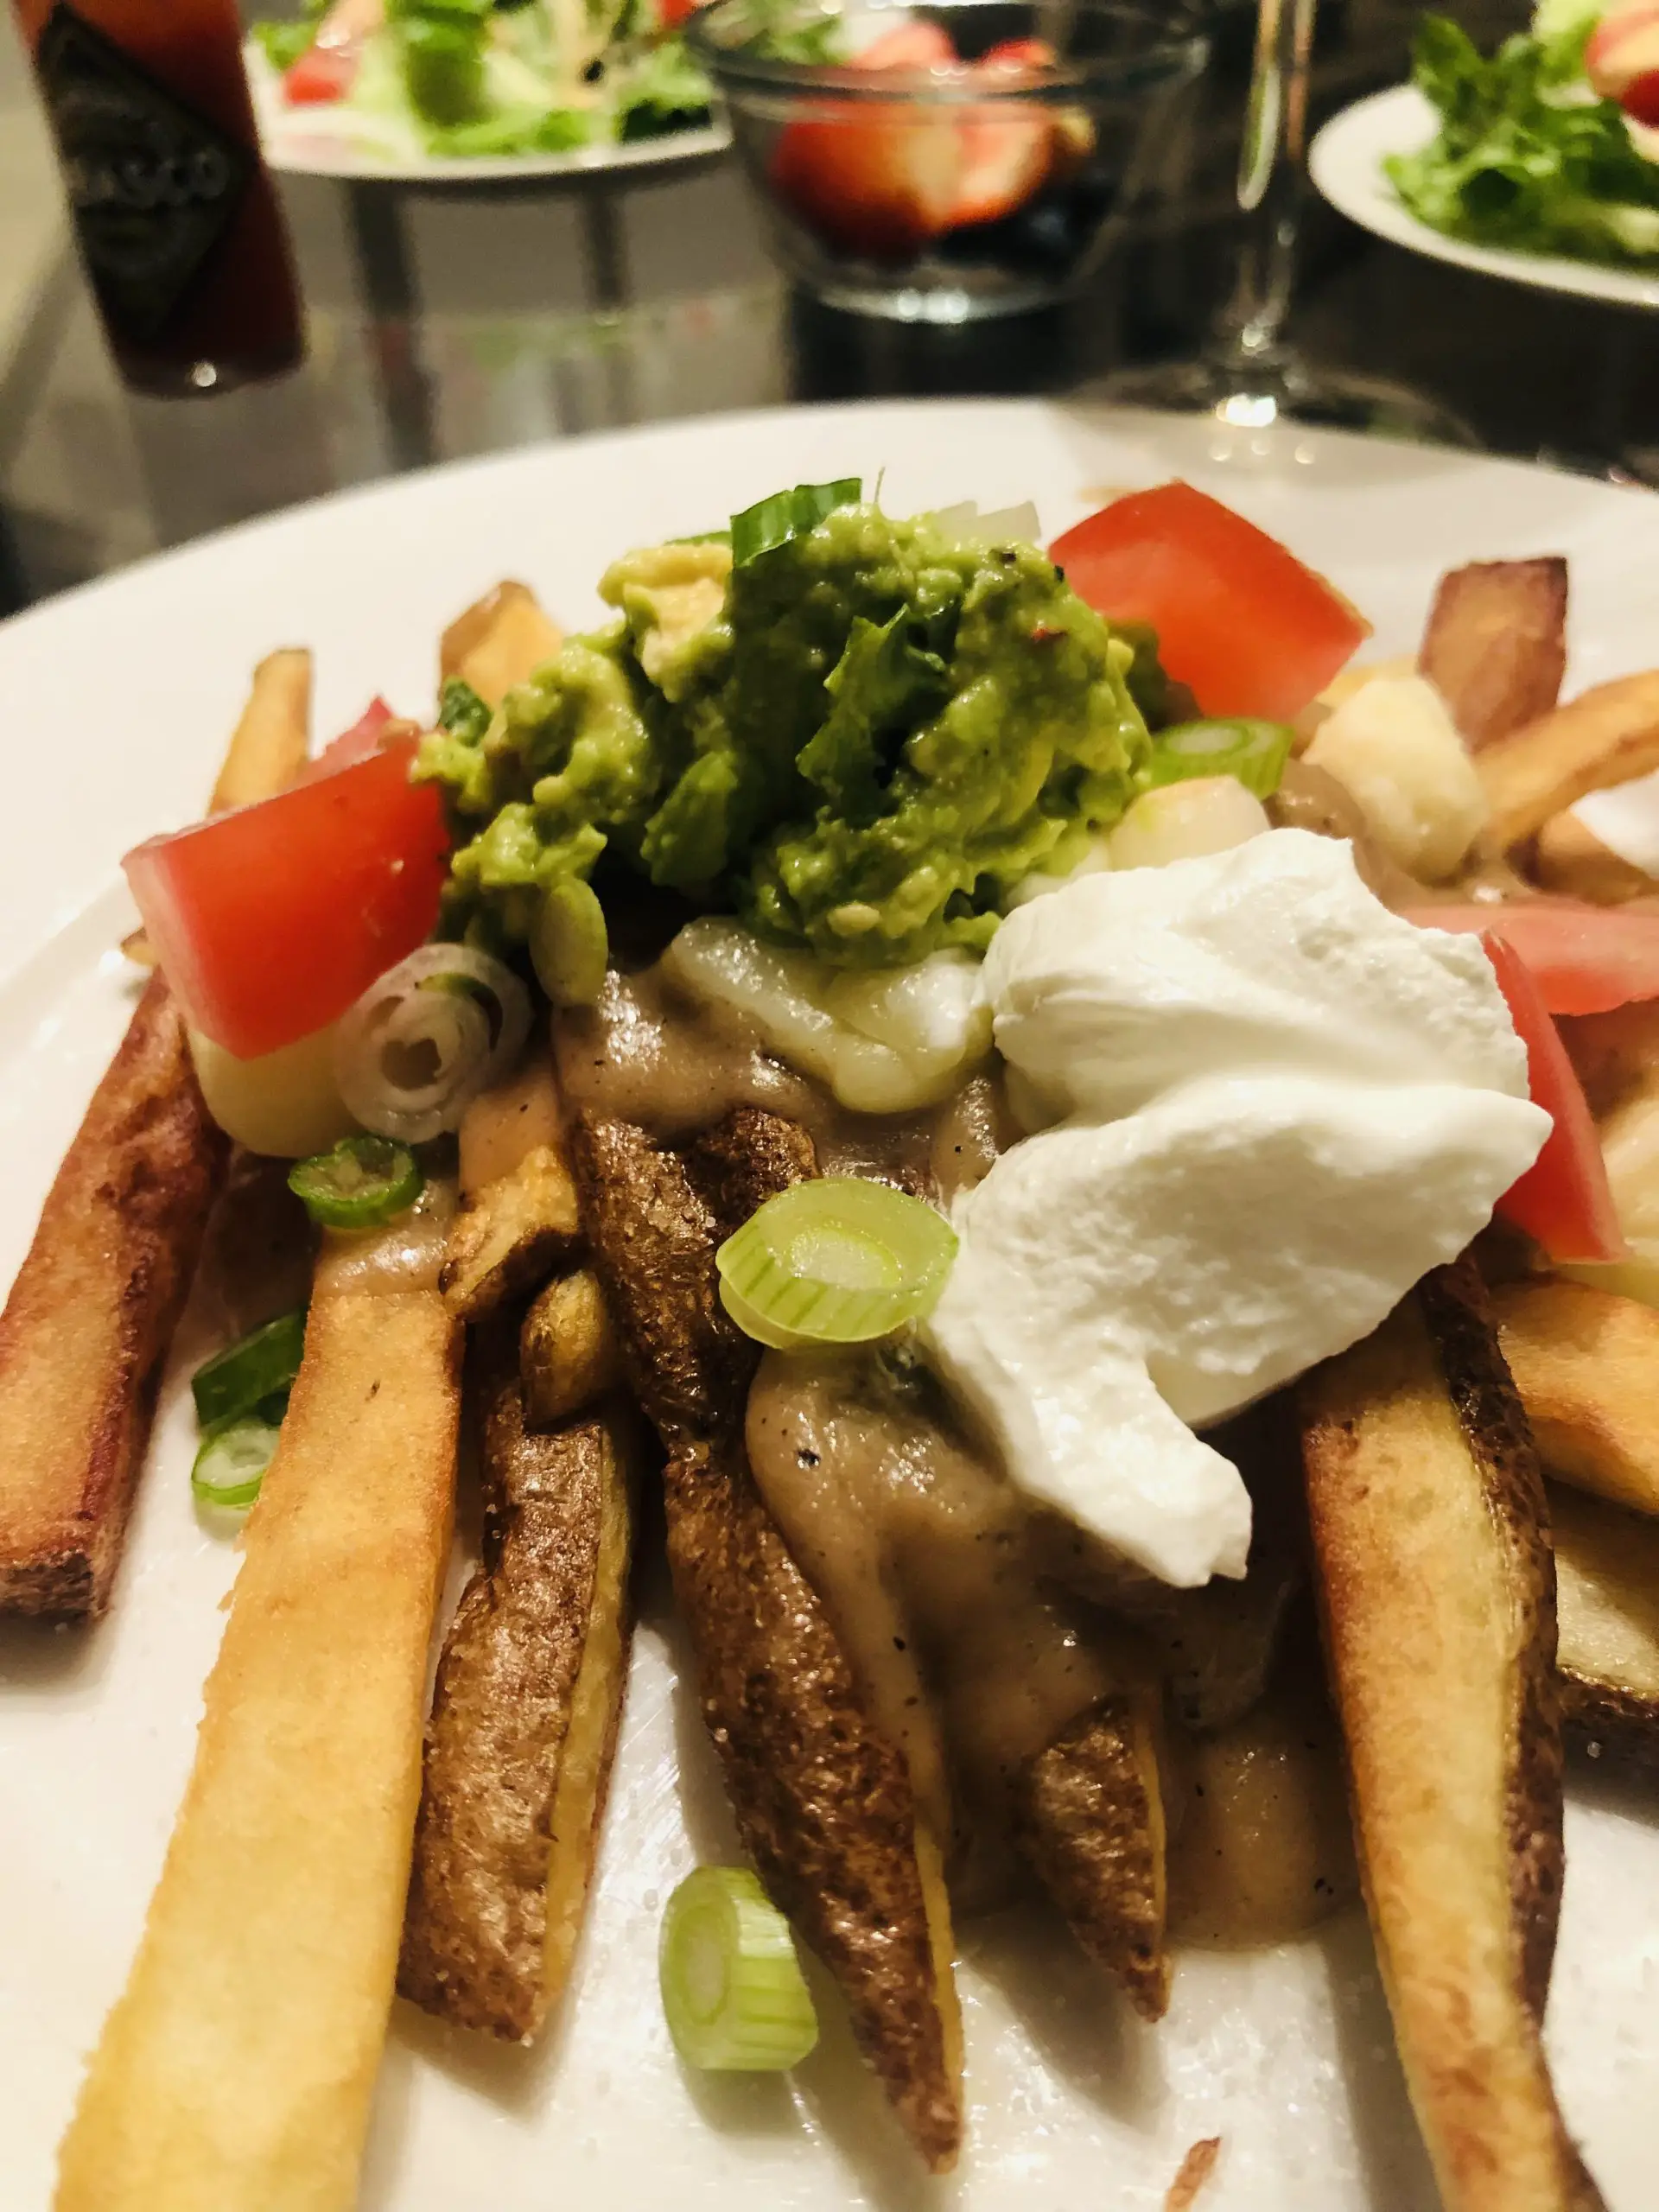 Poutine with guacamole, sour cream, and tomatoes